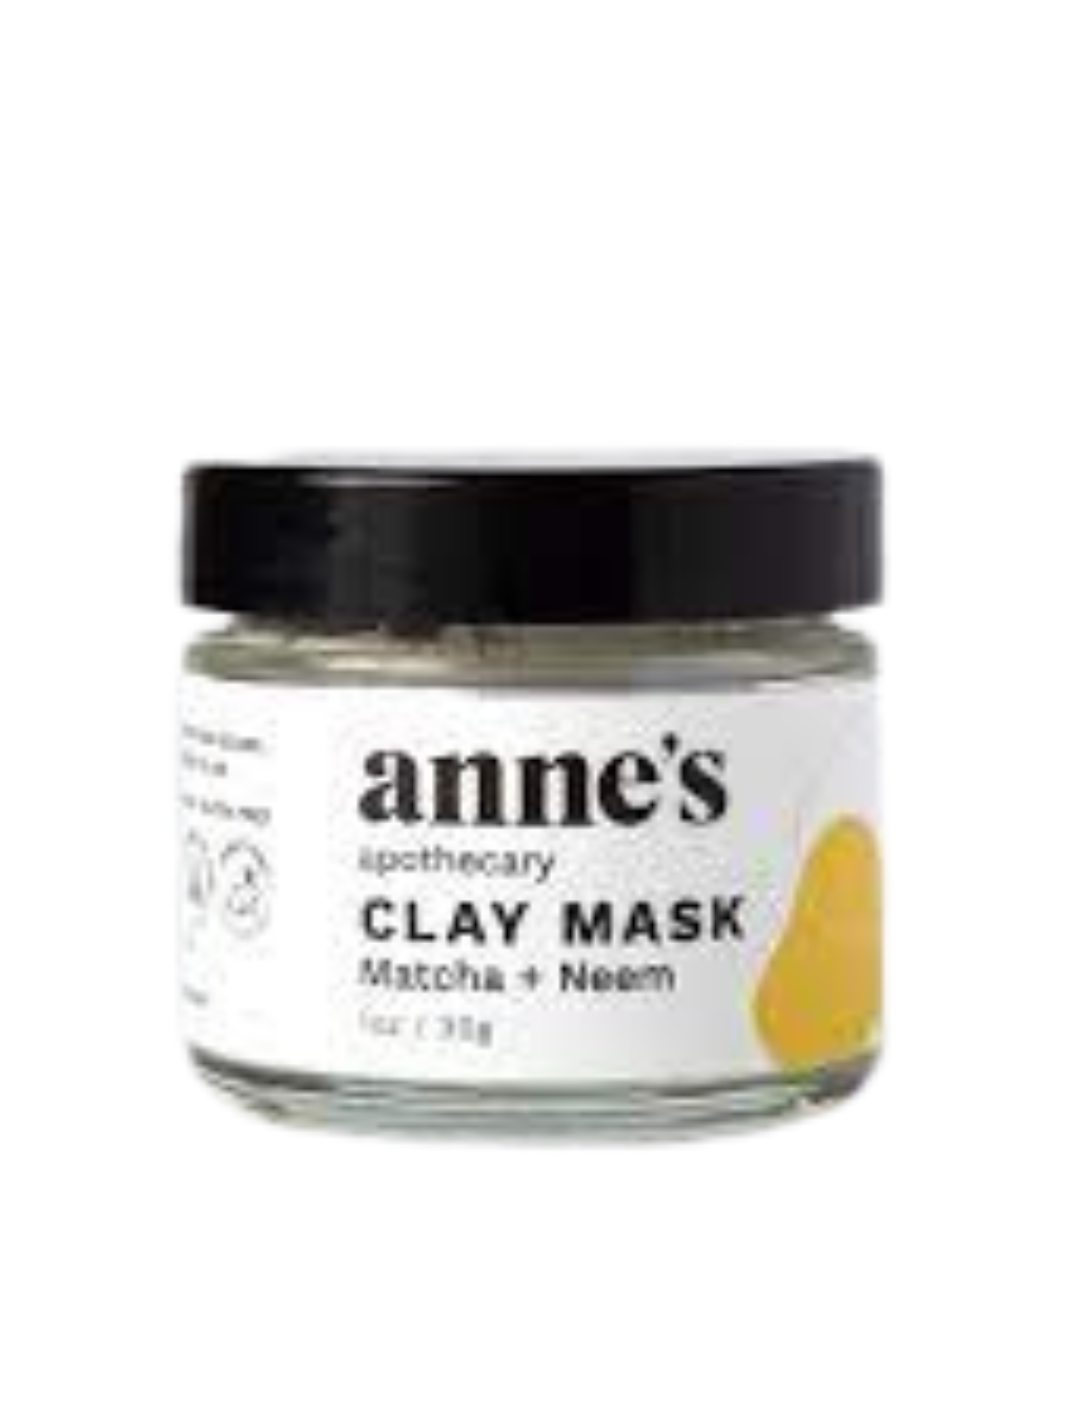 Clay Mask with Matcha and Neem powder